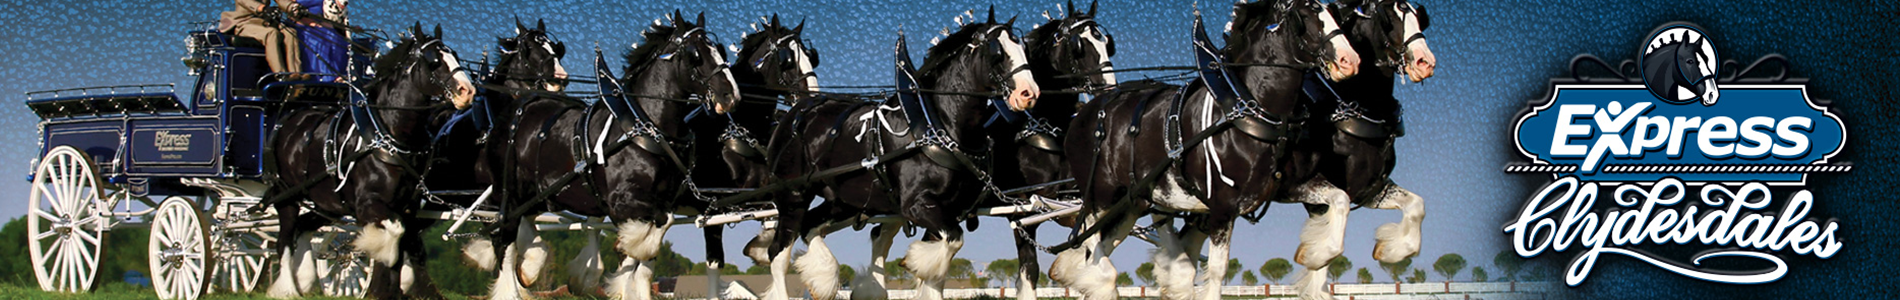 Express Clydesdales are Coming to Walla Walla